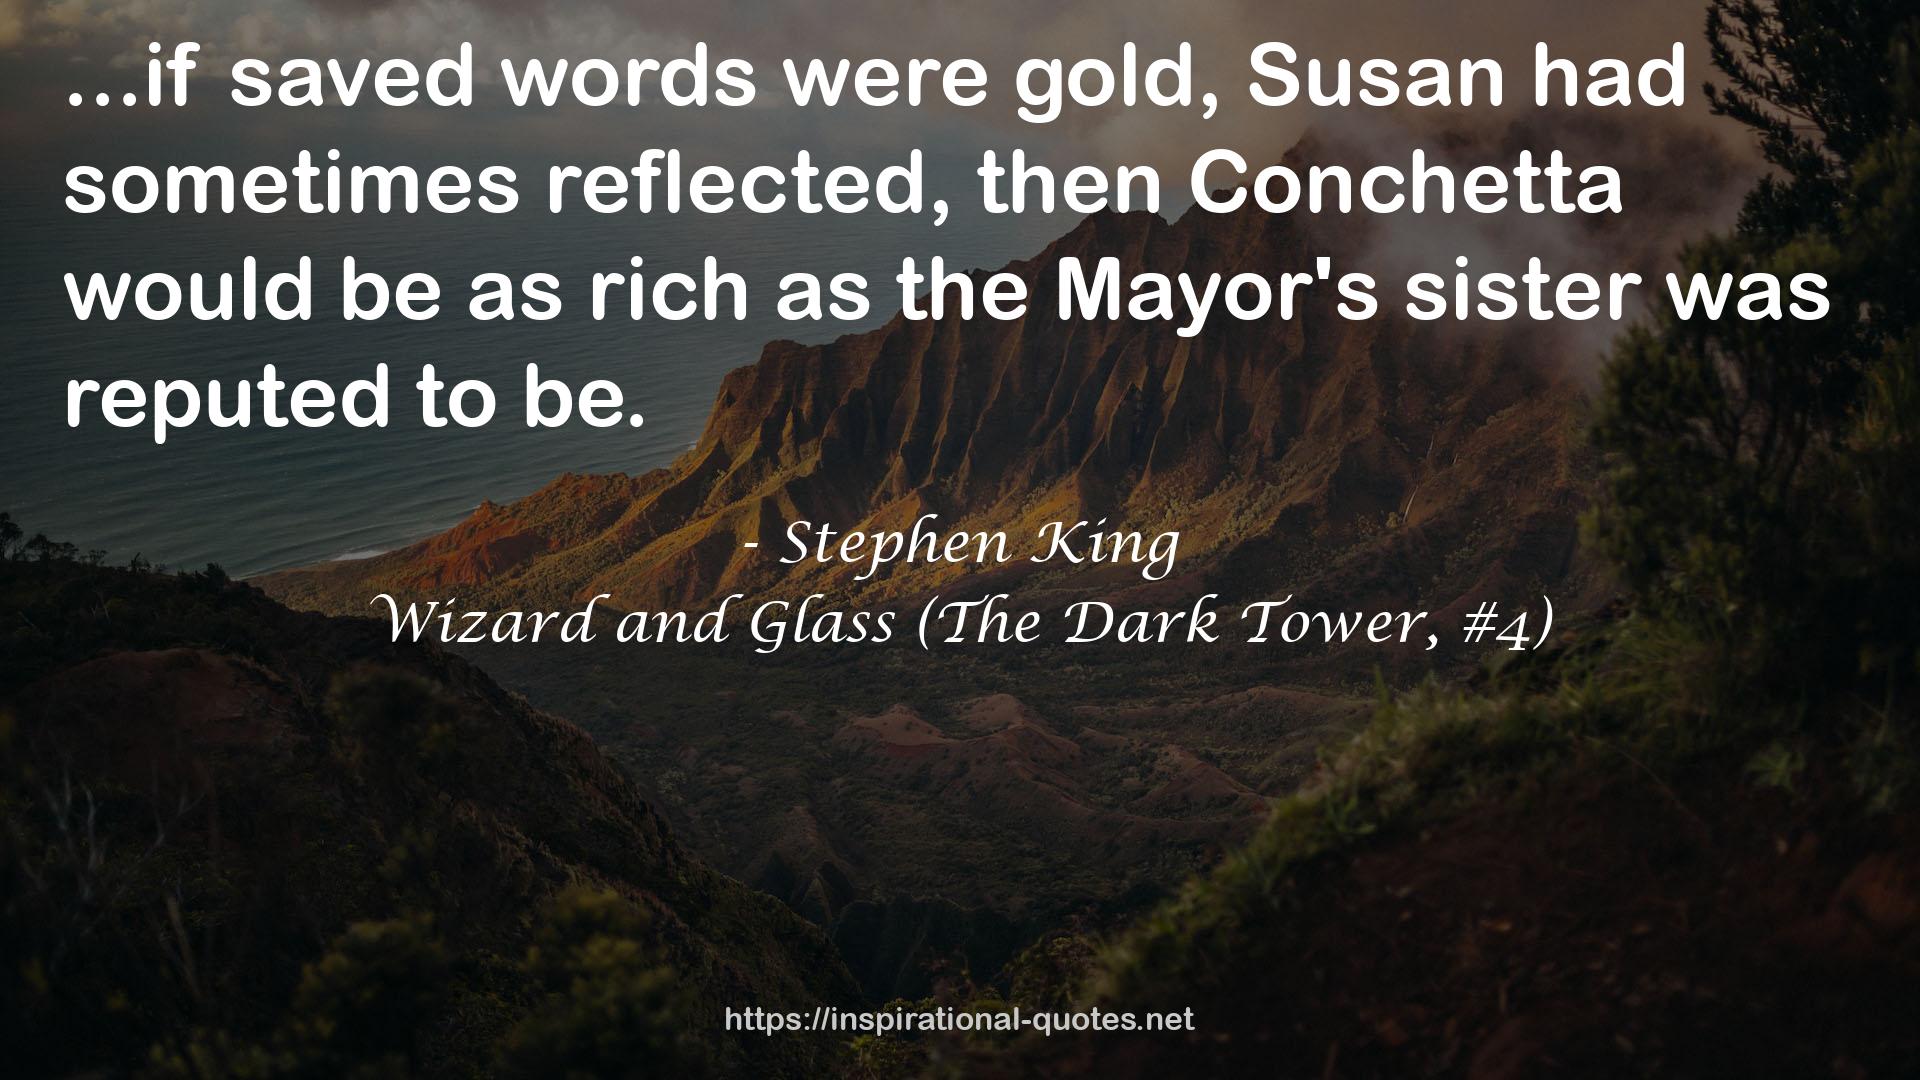 Wizard and Glass (The Dark Tower, #4) QUOTES